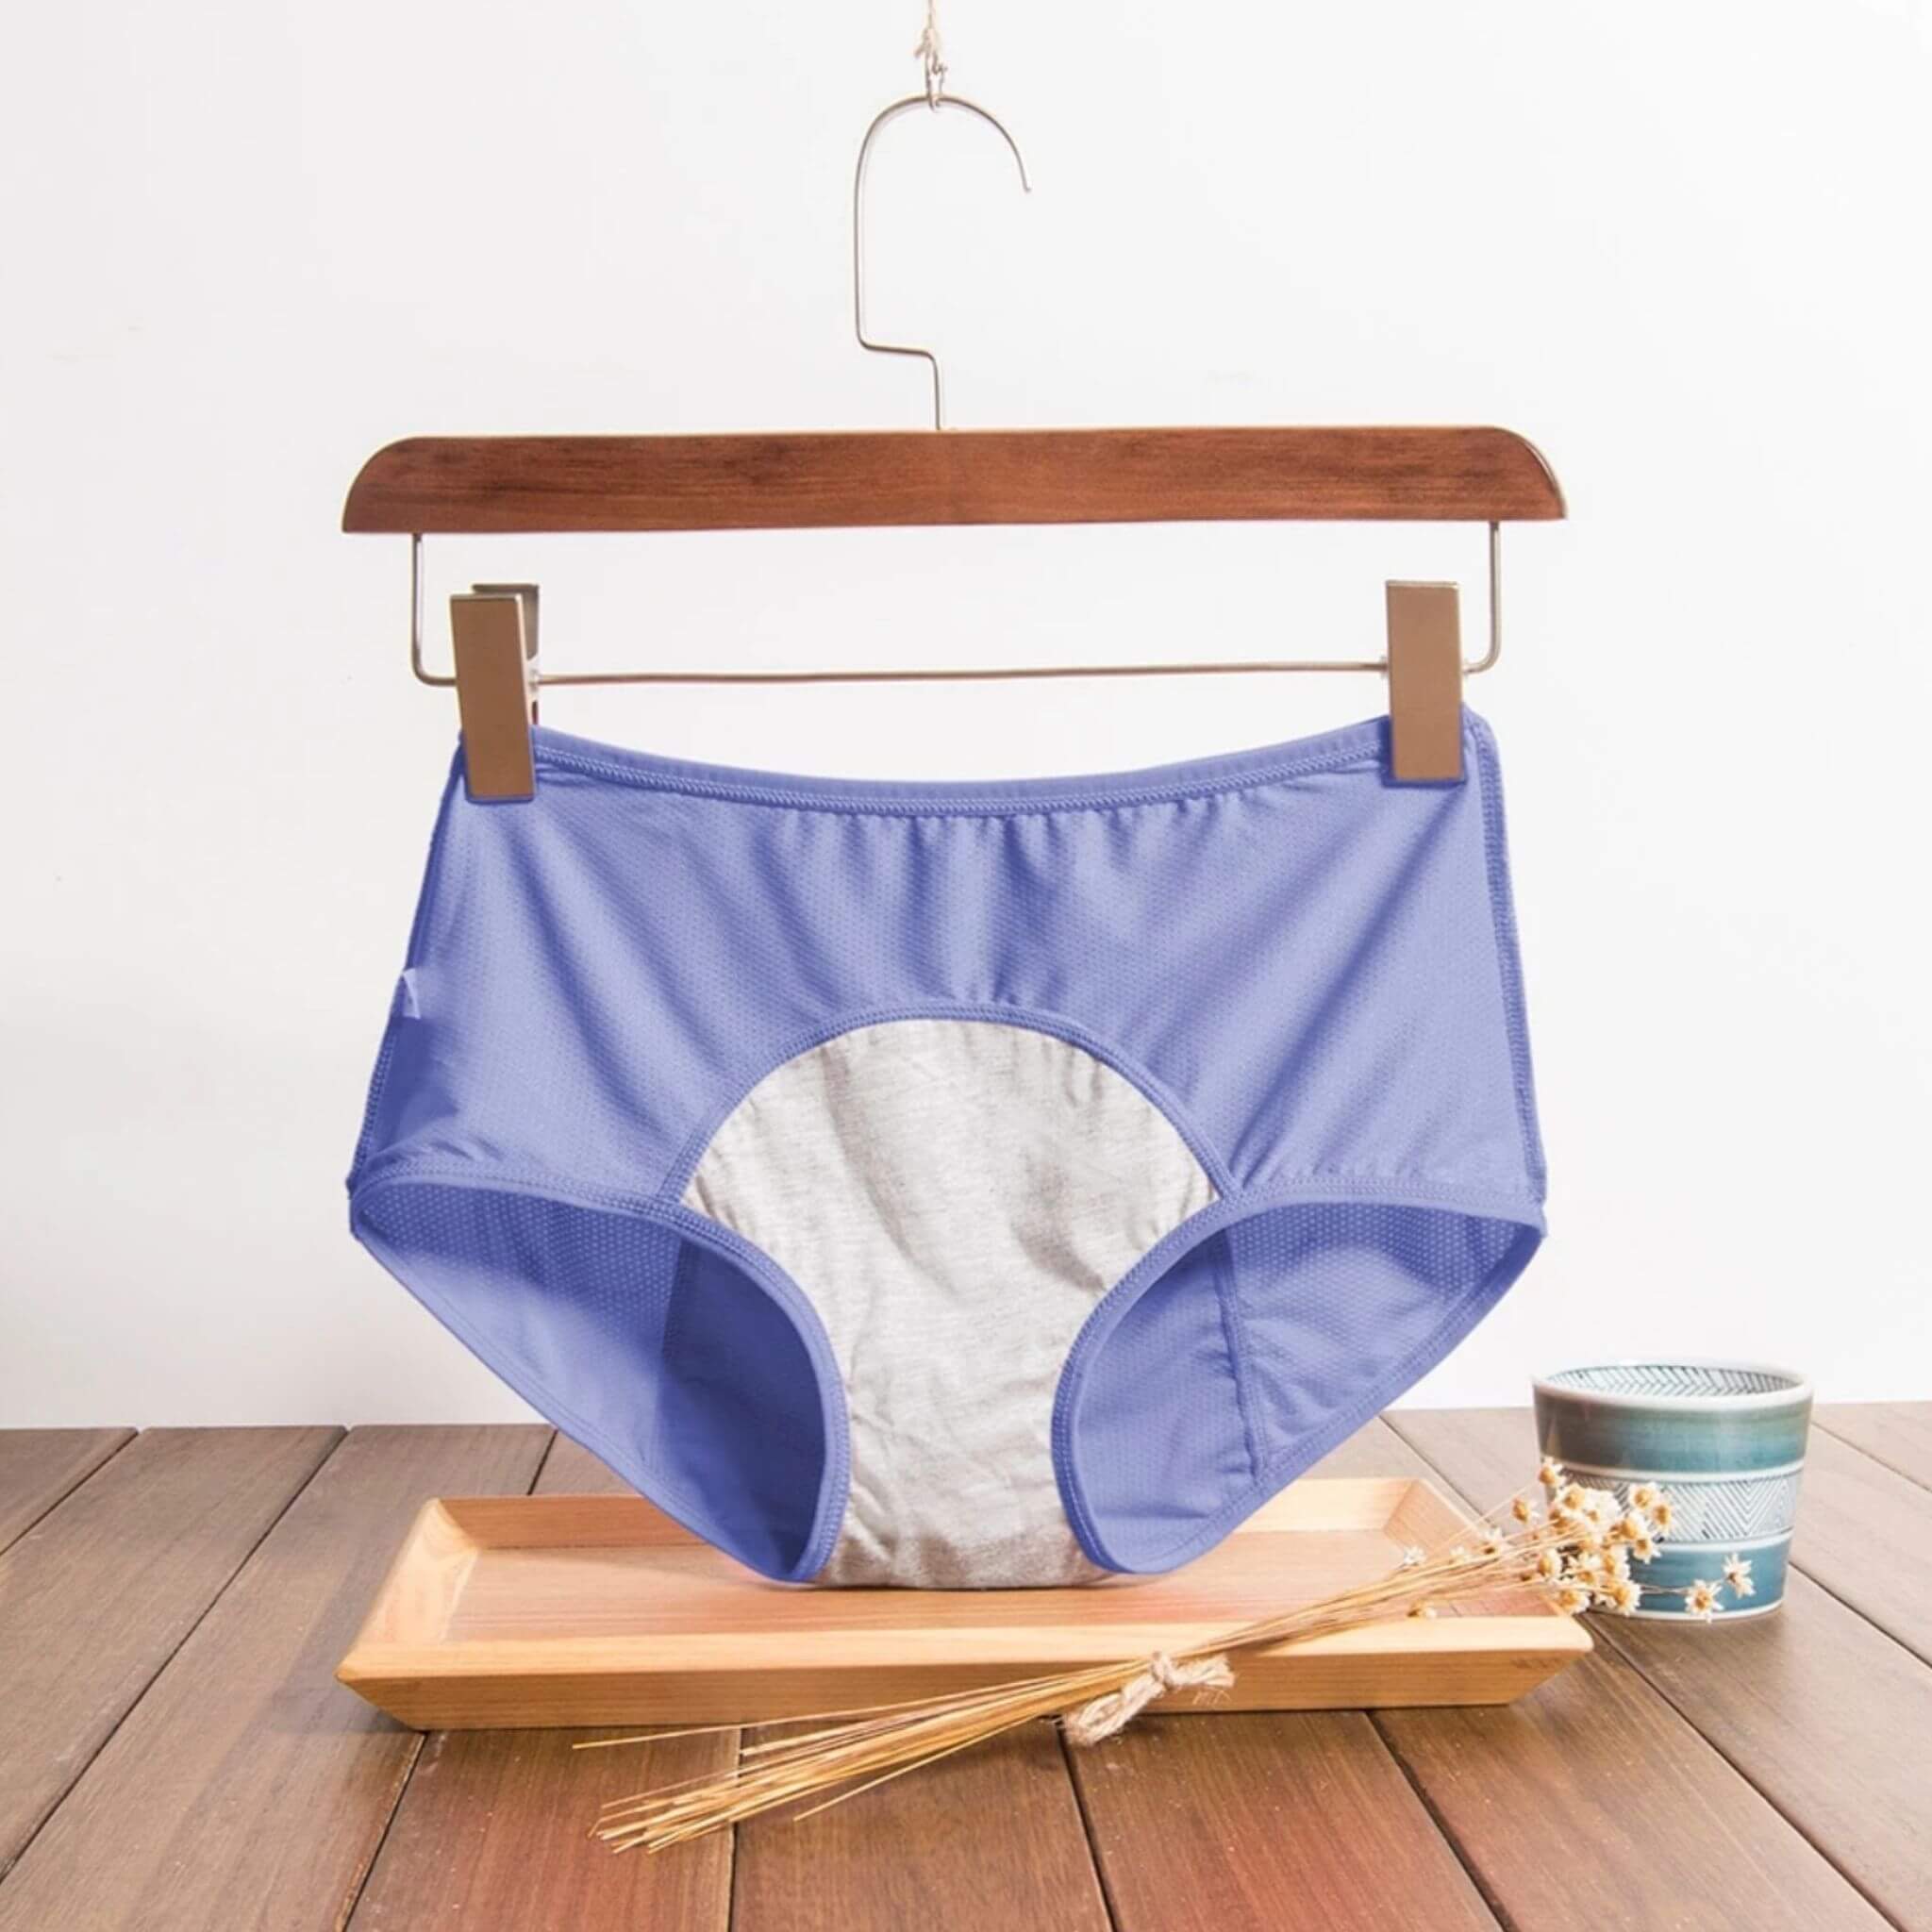 Panthion Period Shorts Absorbent Underwear Menstrual Incontinence